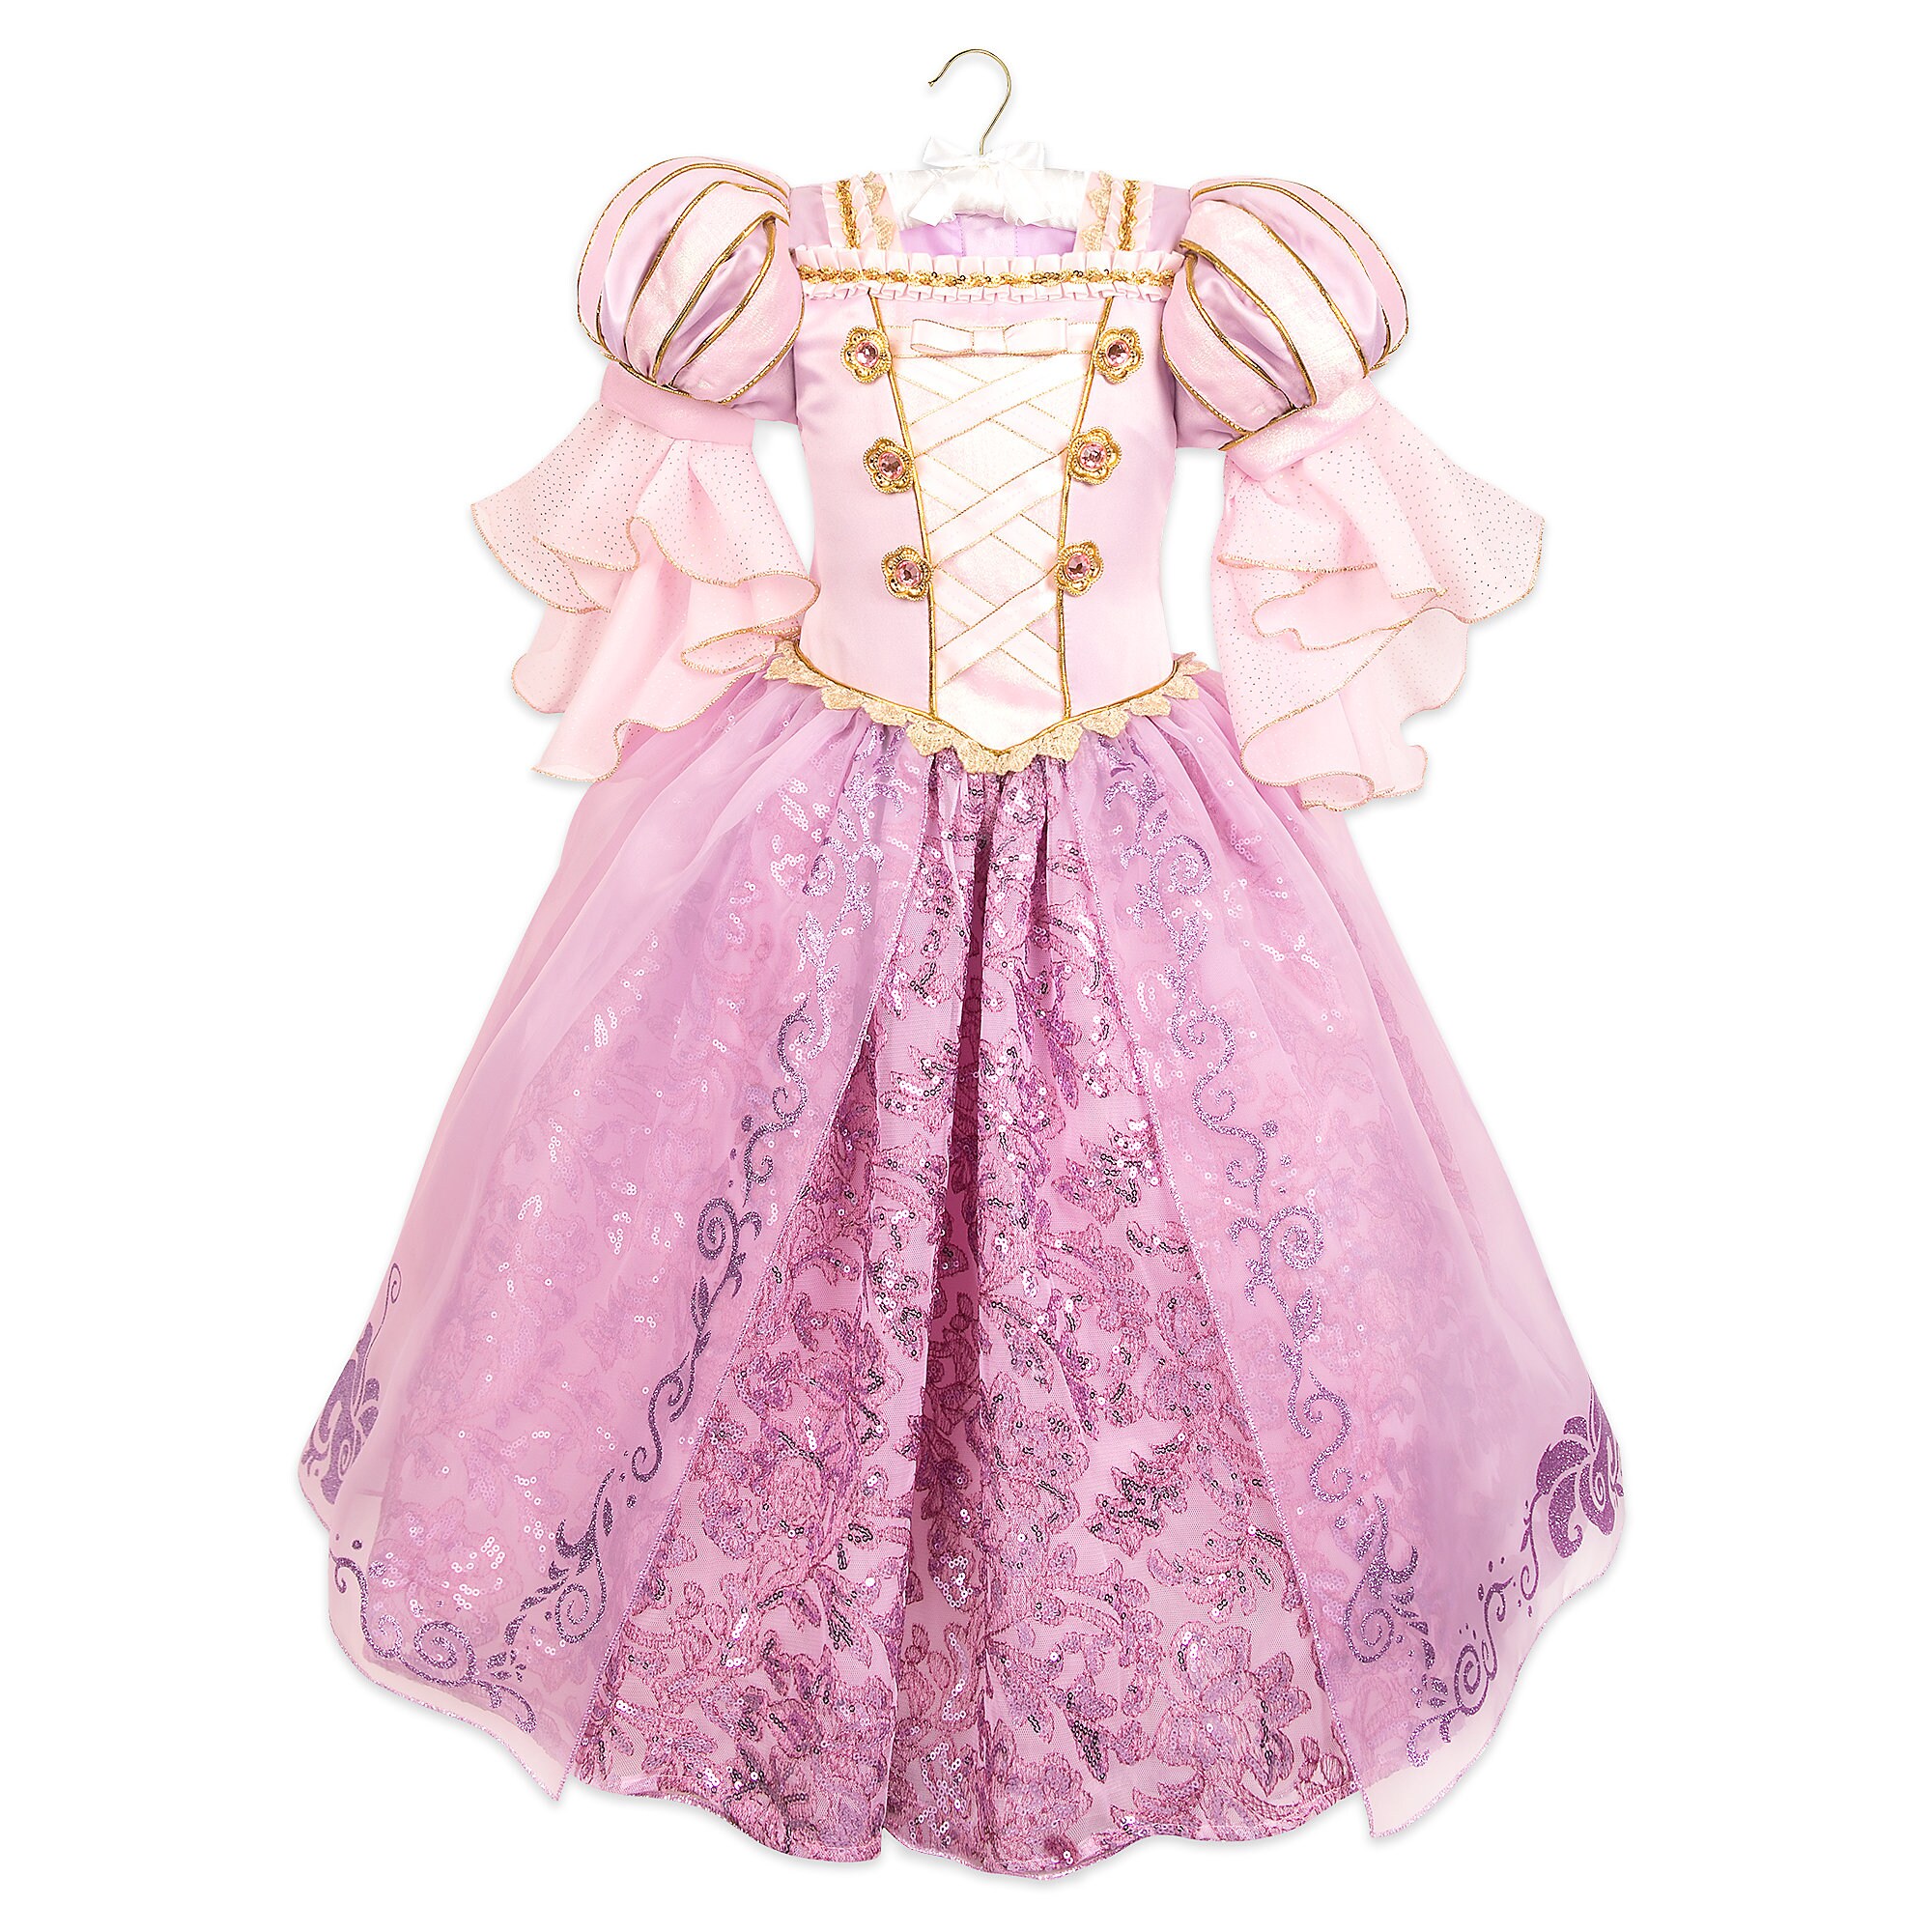 Rapunzel Deluxe Costume For Kids is now available – Dis Merchandise News